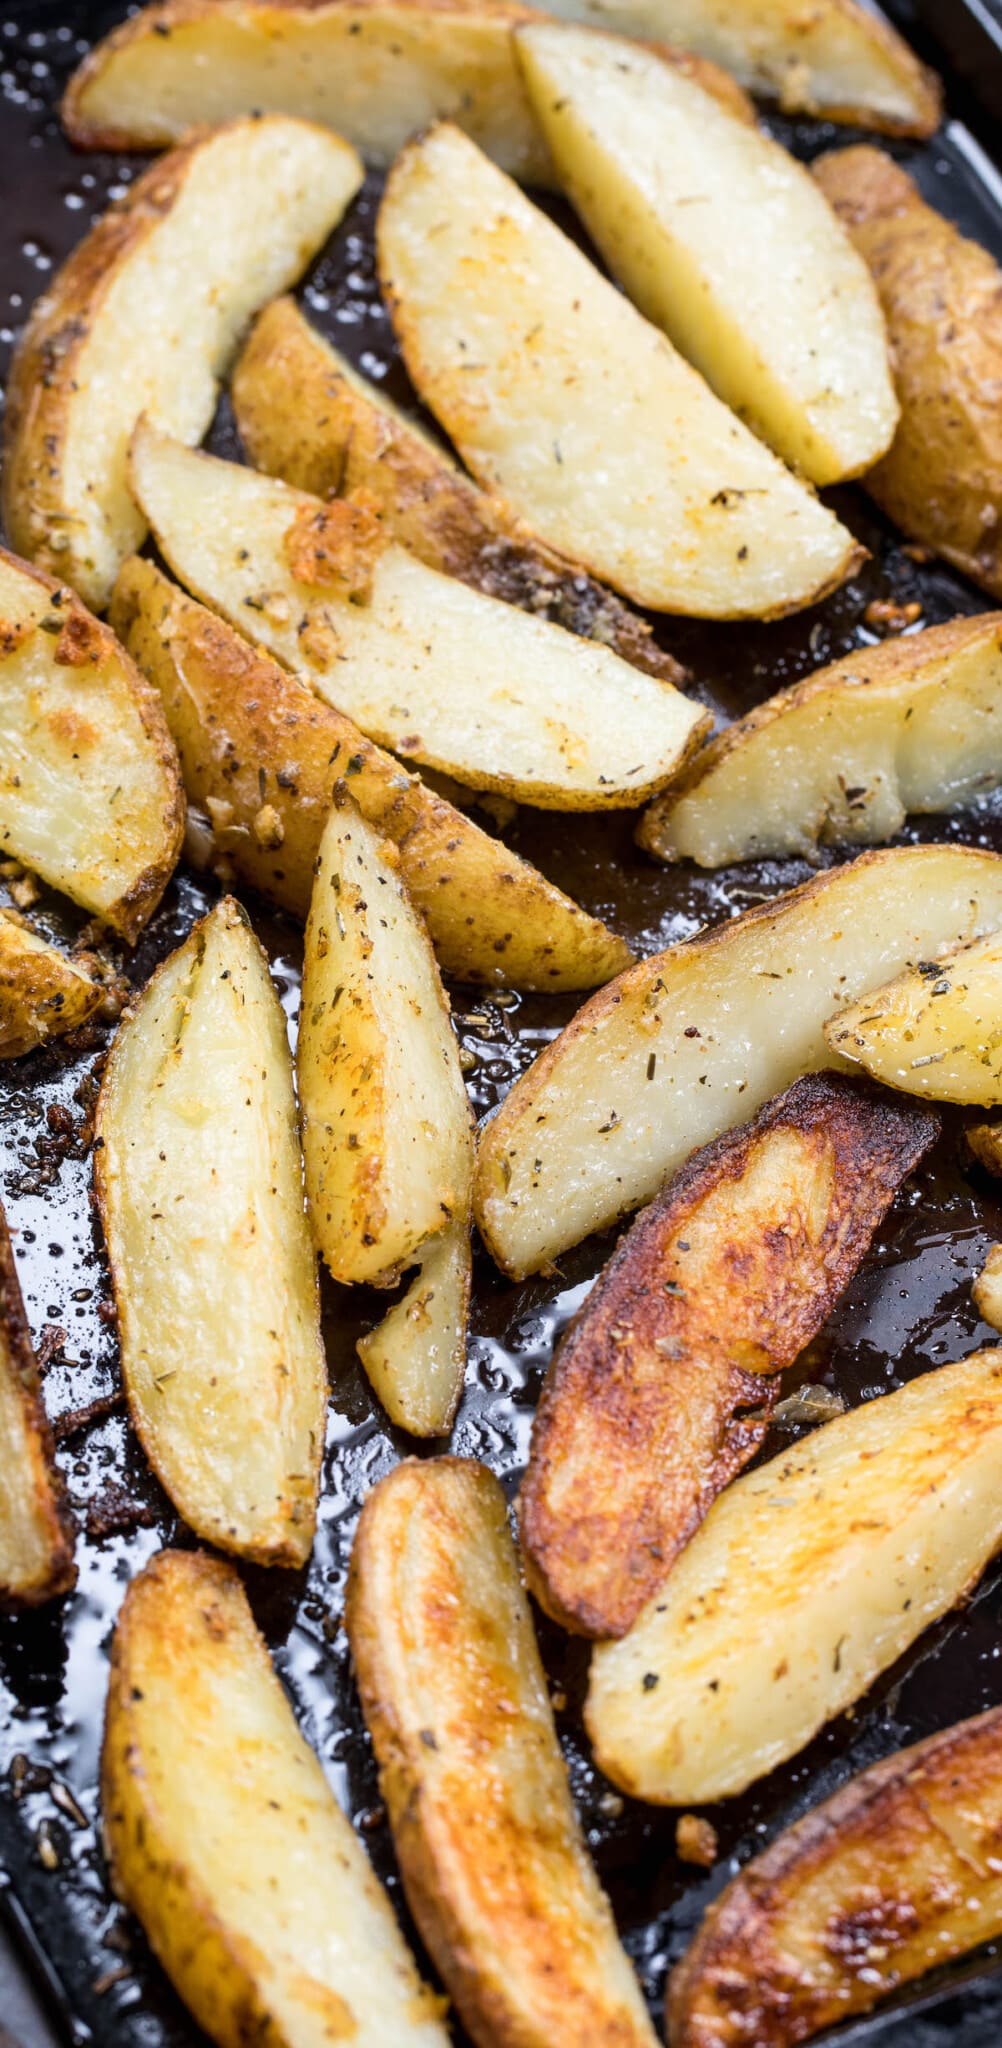 cookie sheet with roasted potatoes